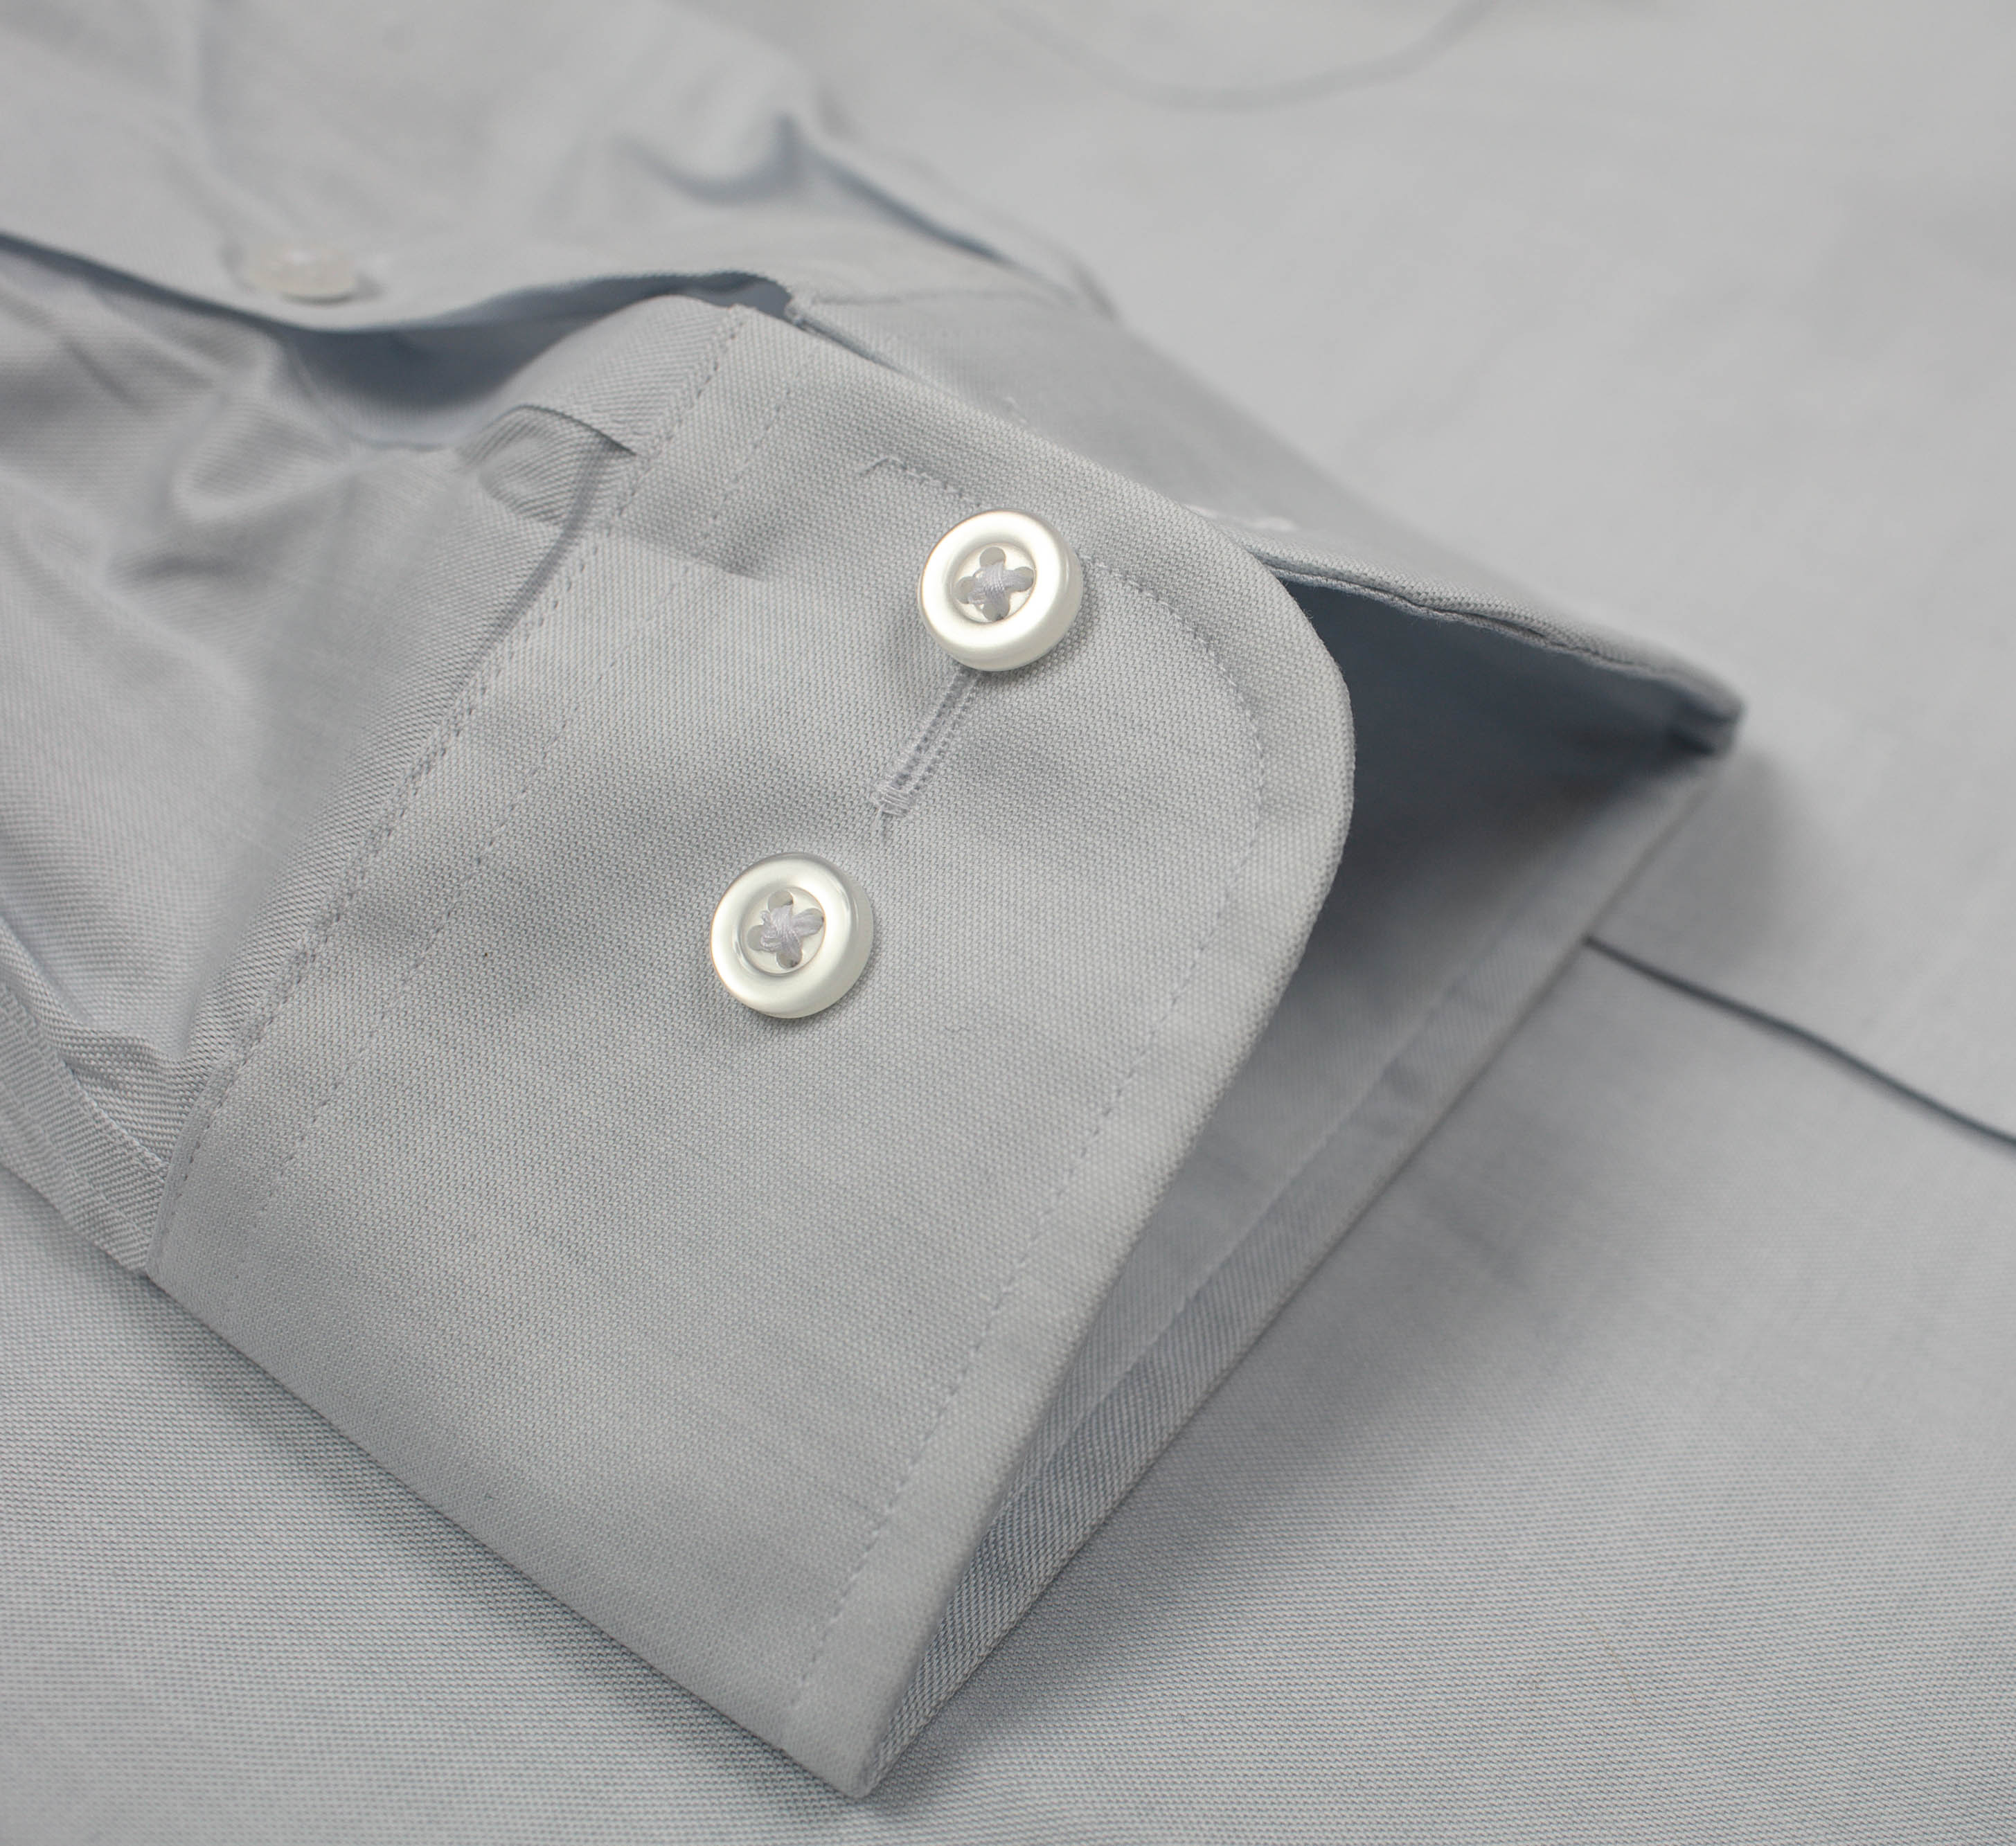 087 TF SC - Thomas Dylan Silver Grey Tailored Fit Spread Collar